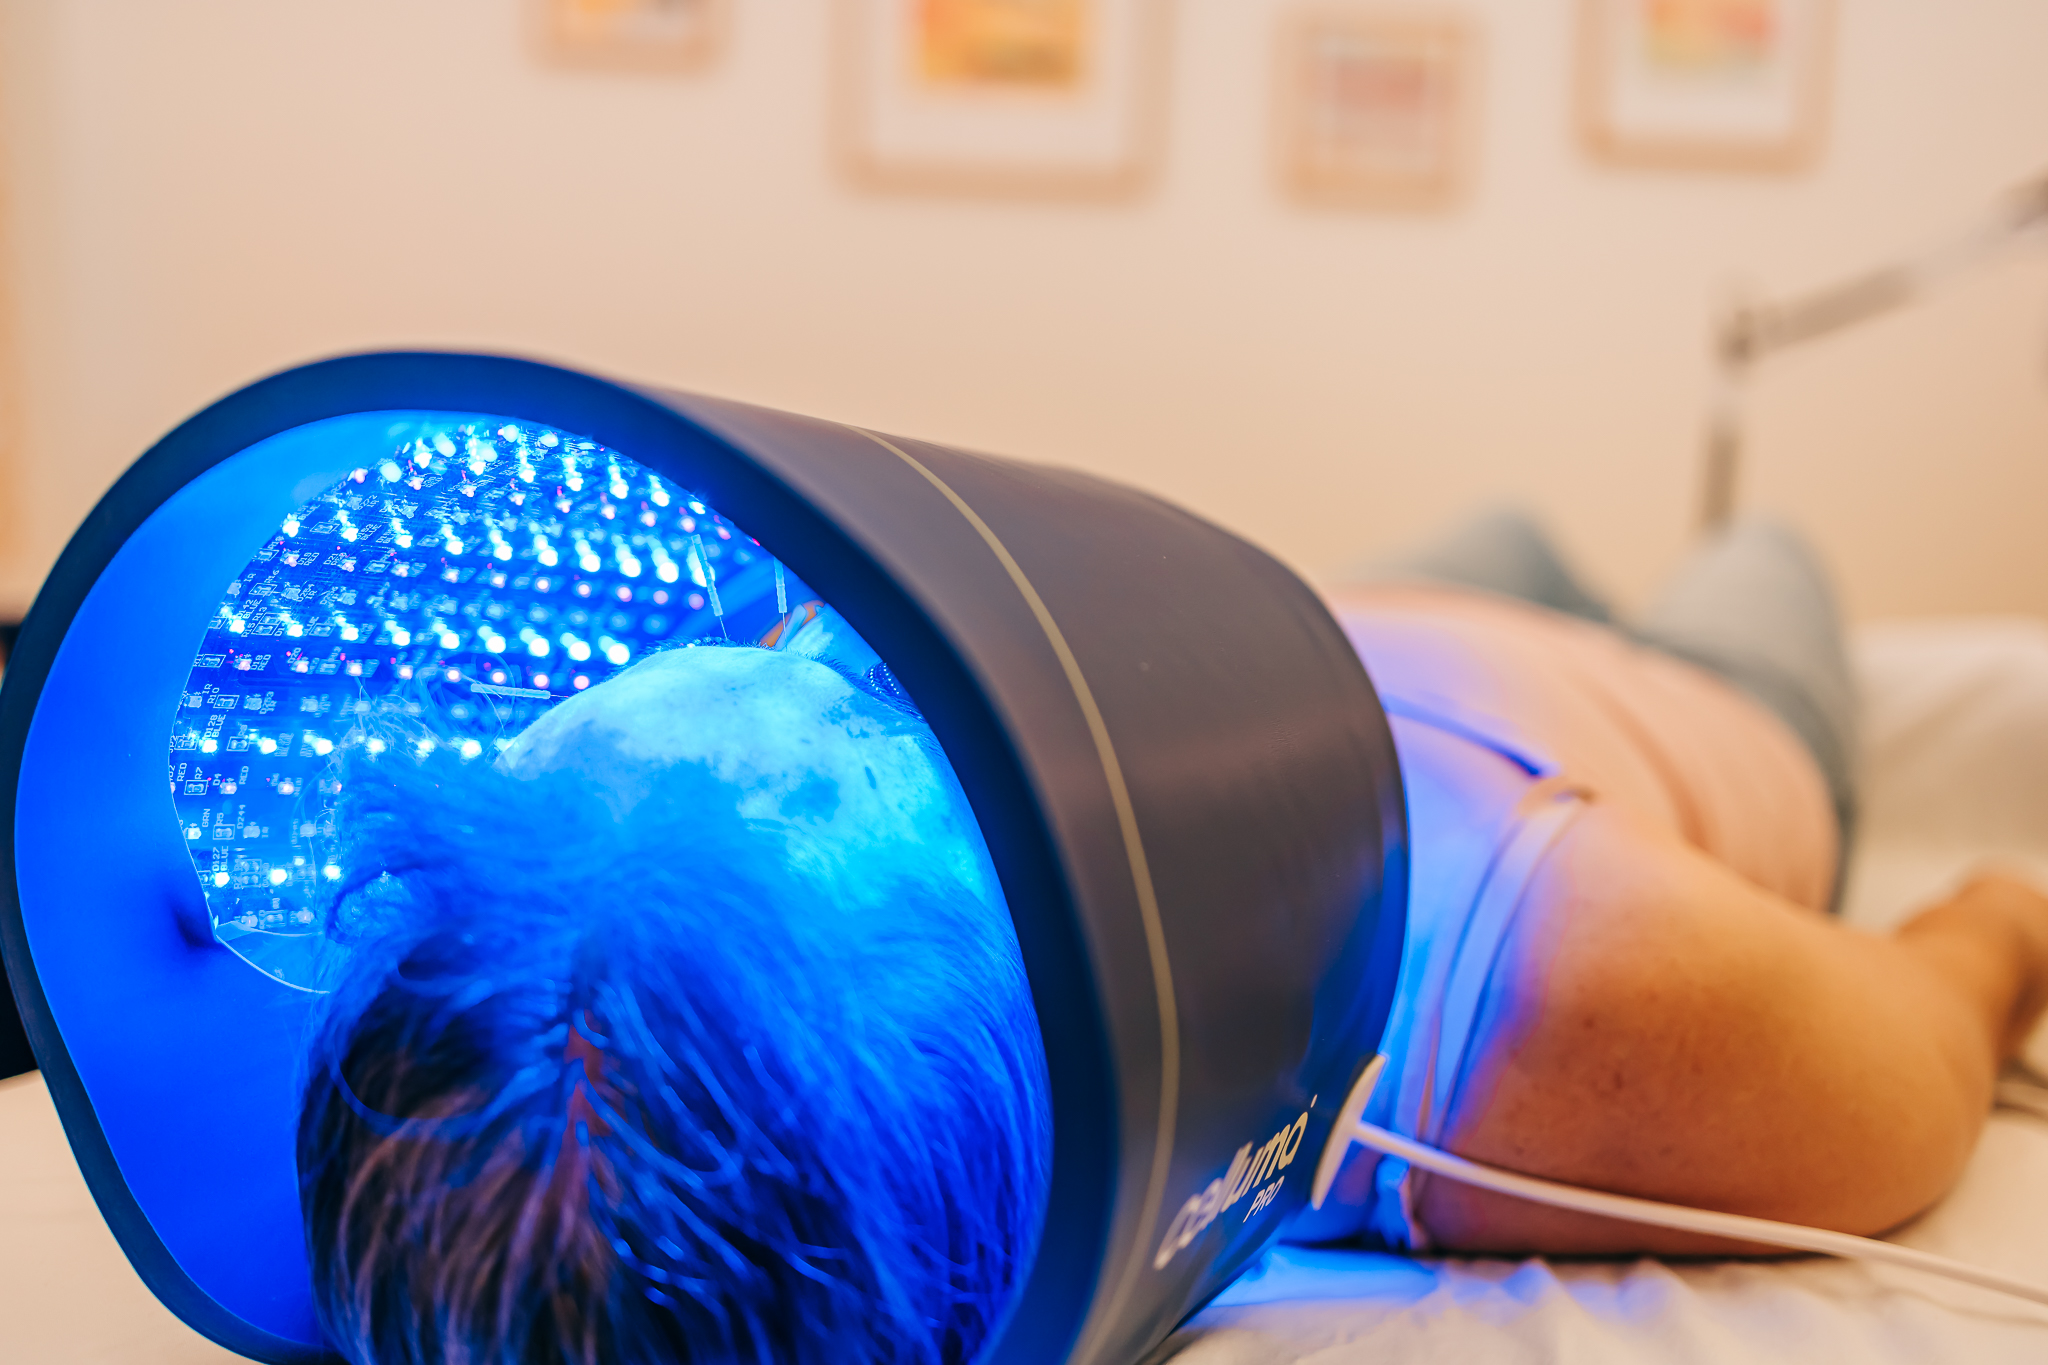 Patient resting during a cosmetic acupuncture treatment with Celluma LED Light therapy add-on at Seneca Falls Acupuncture.